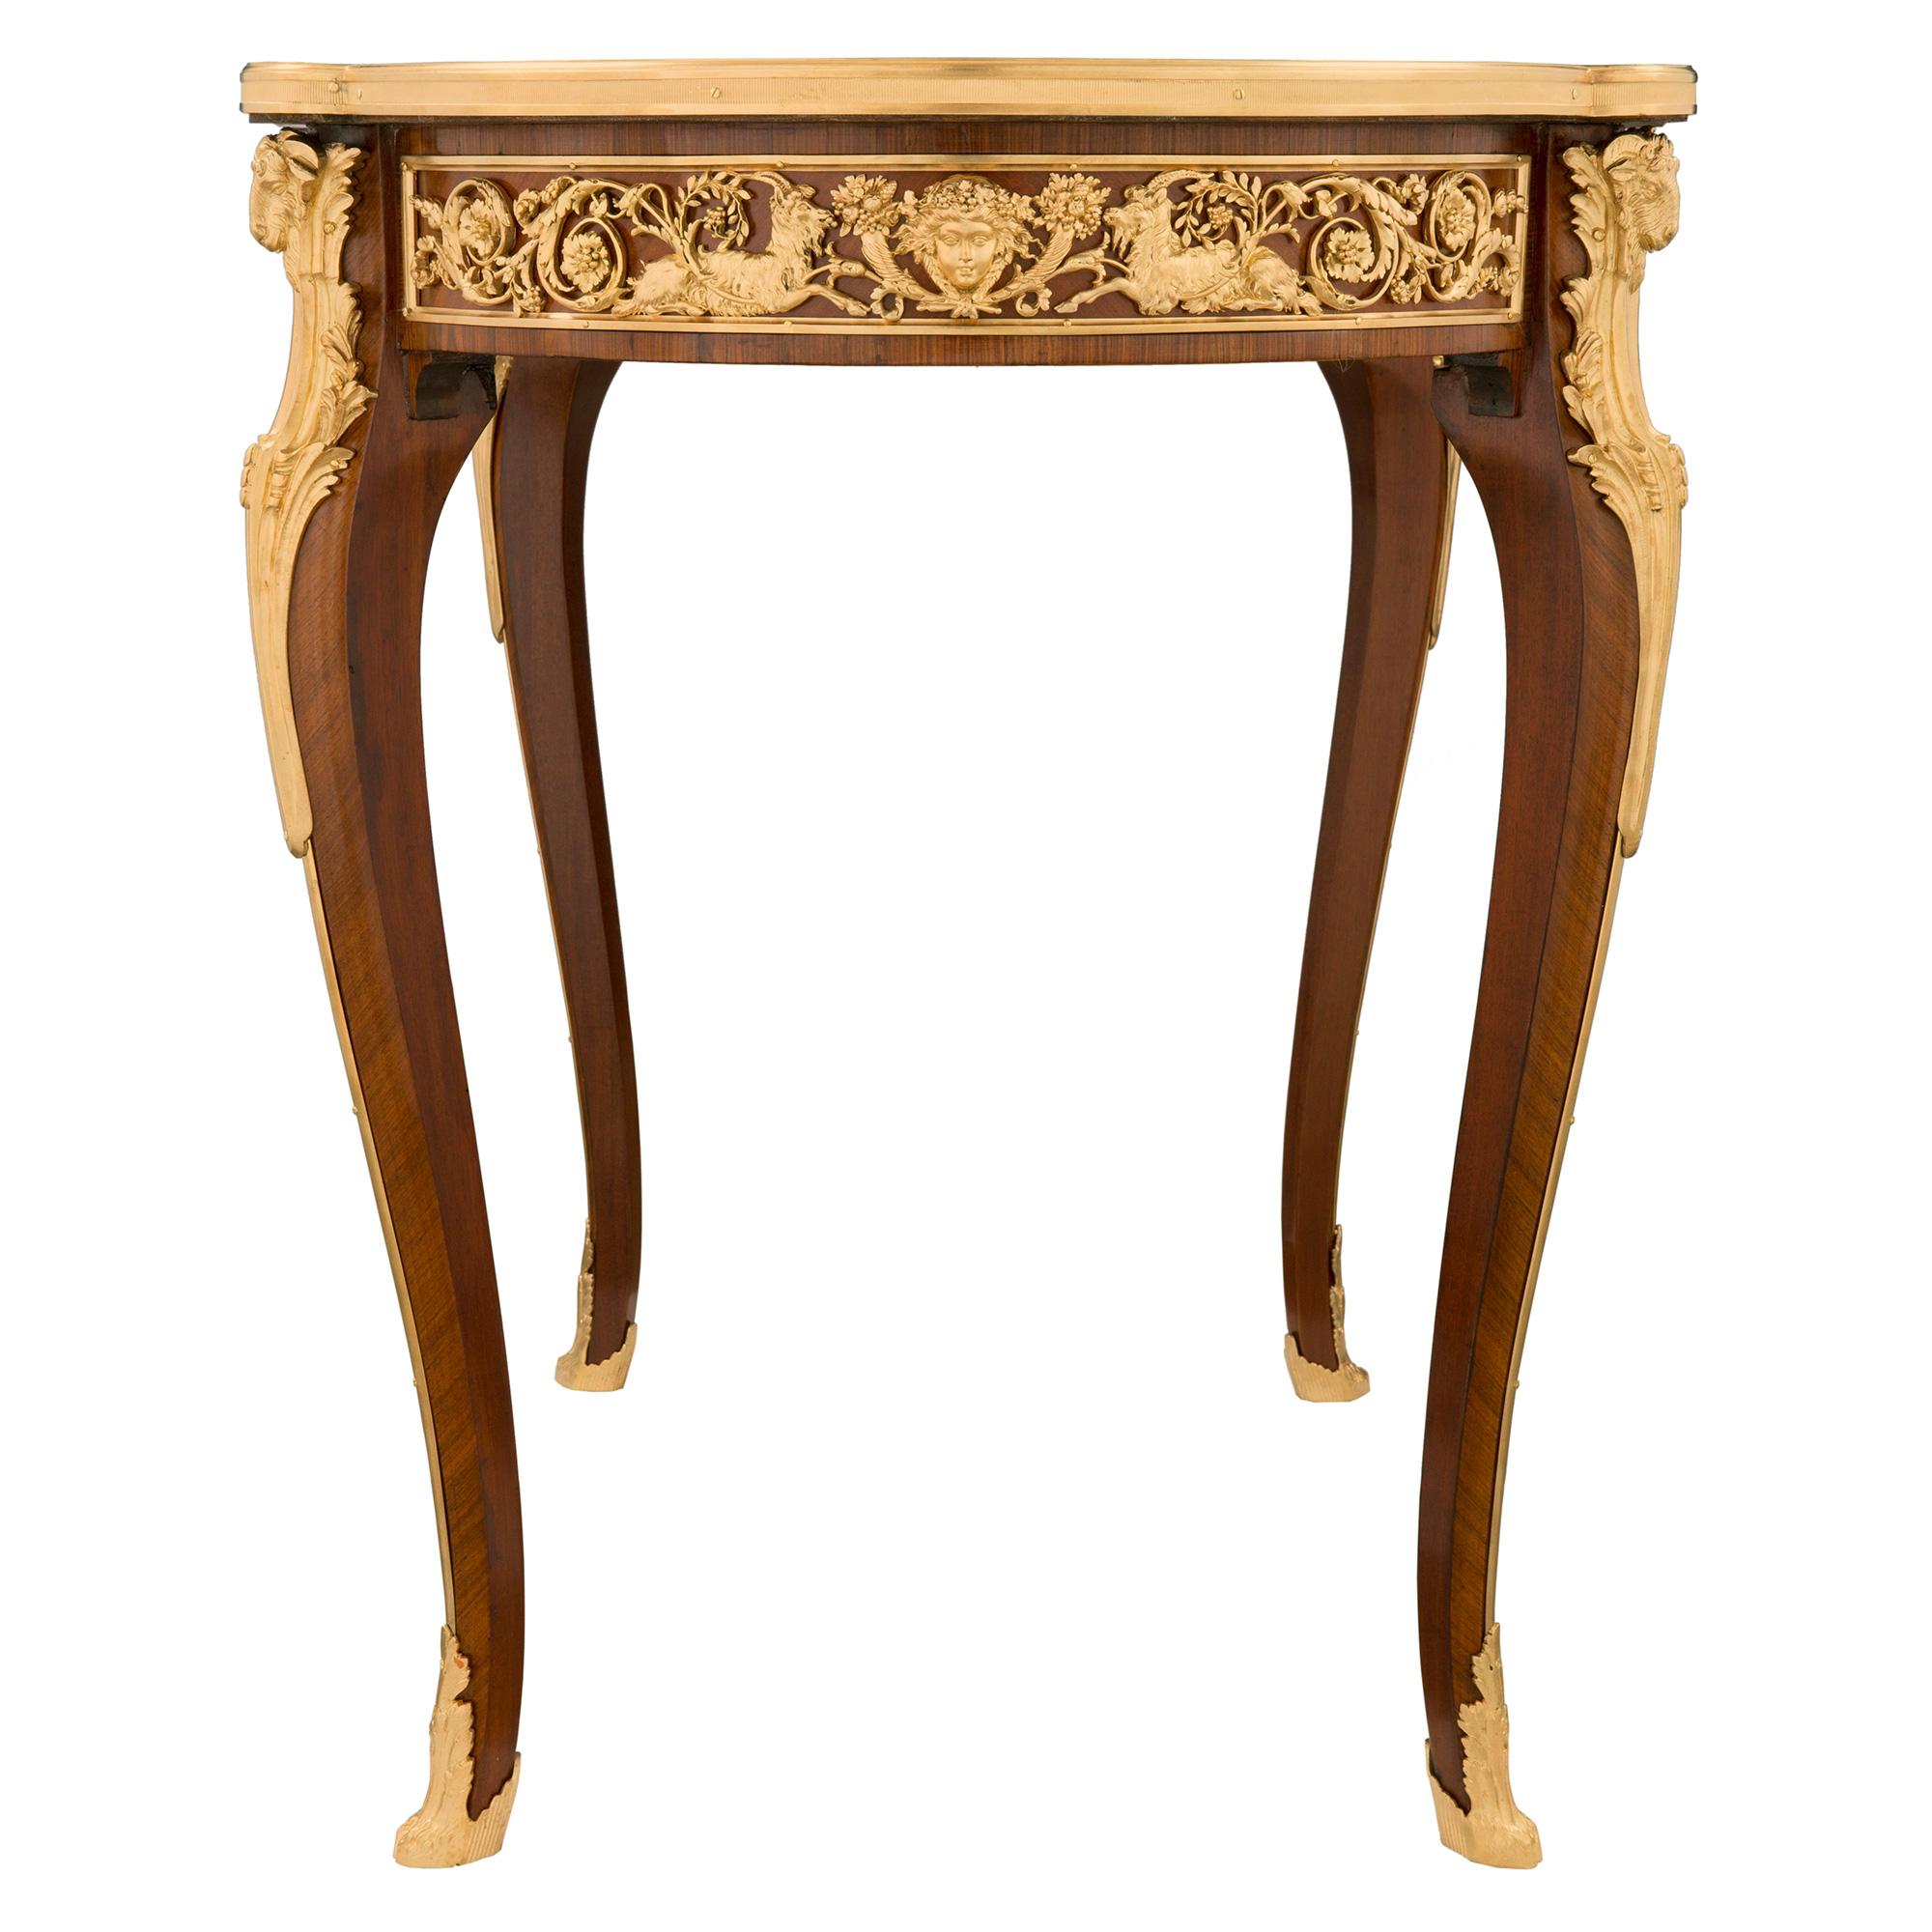 Ormolu French 19th Century Belle Époque Period Oval Side Table/Desk, Signed Sormani For Sale